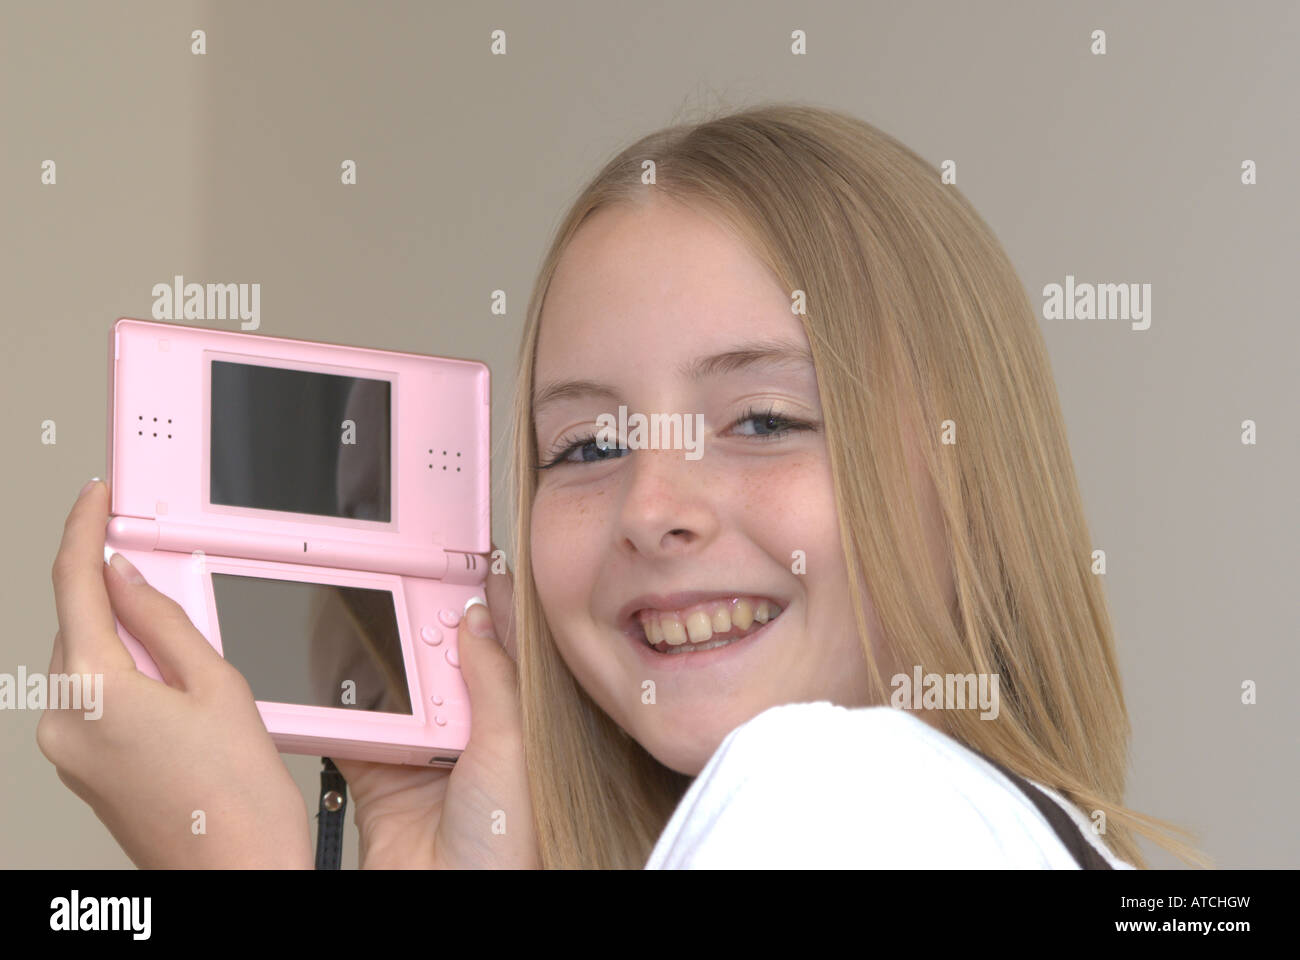 Young girl holding a Nintendo DS lite game console UK Stock Photo - Alamy